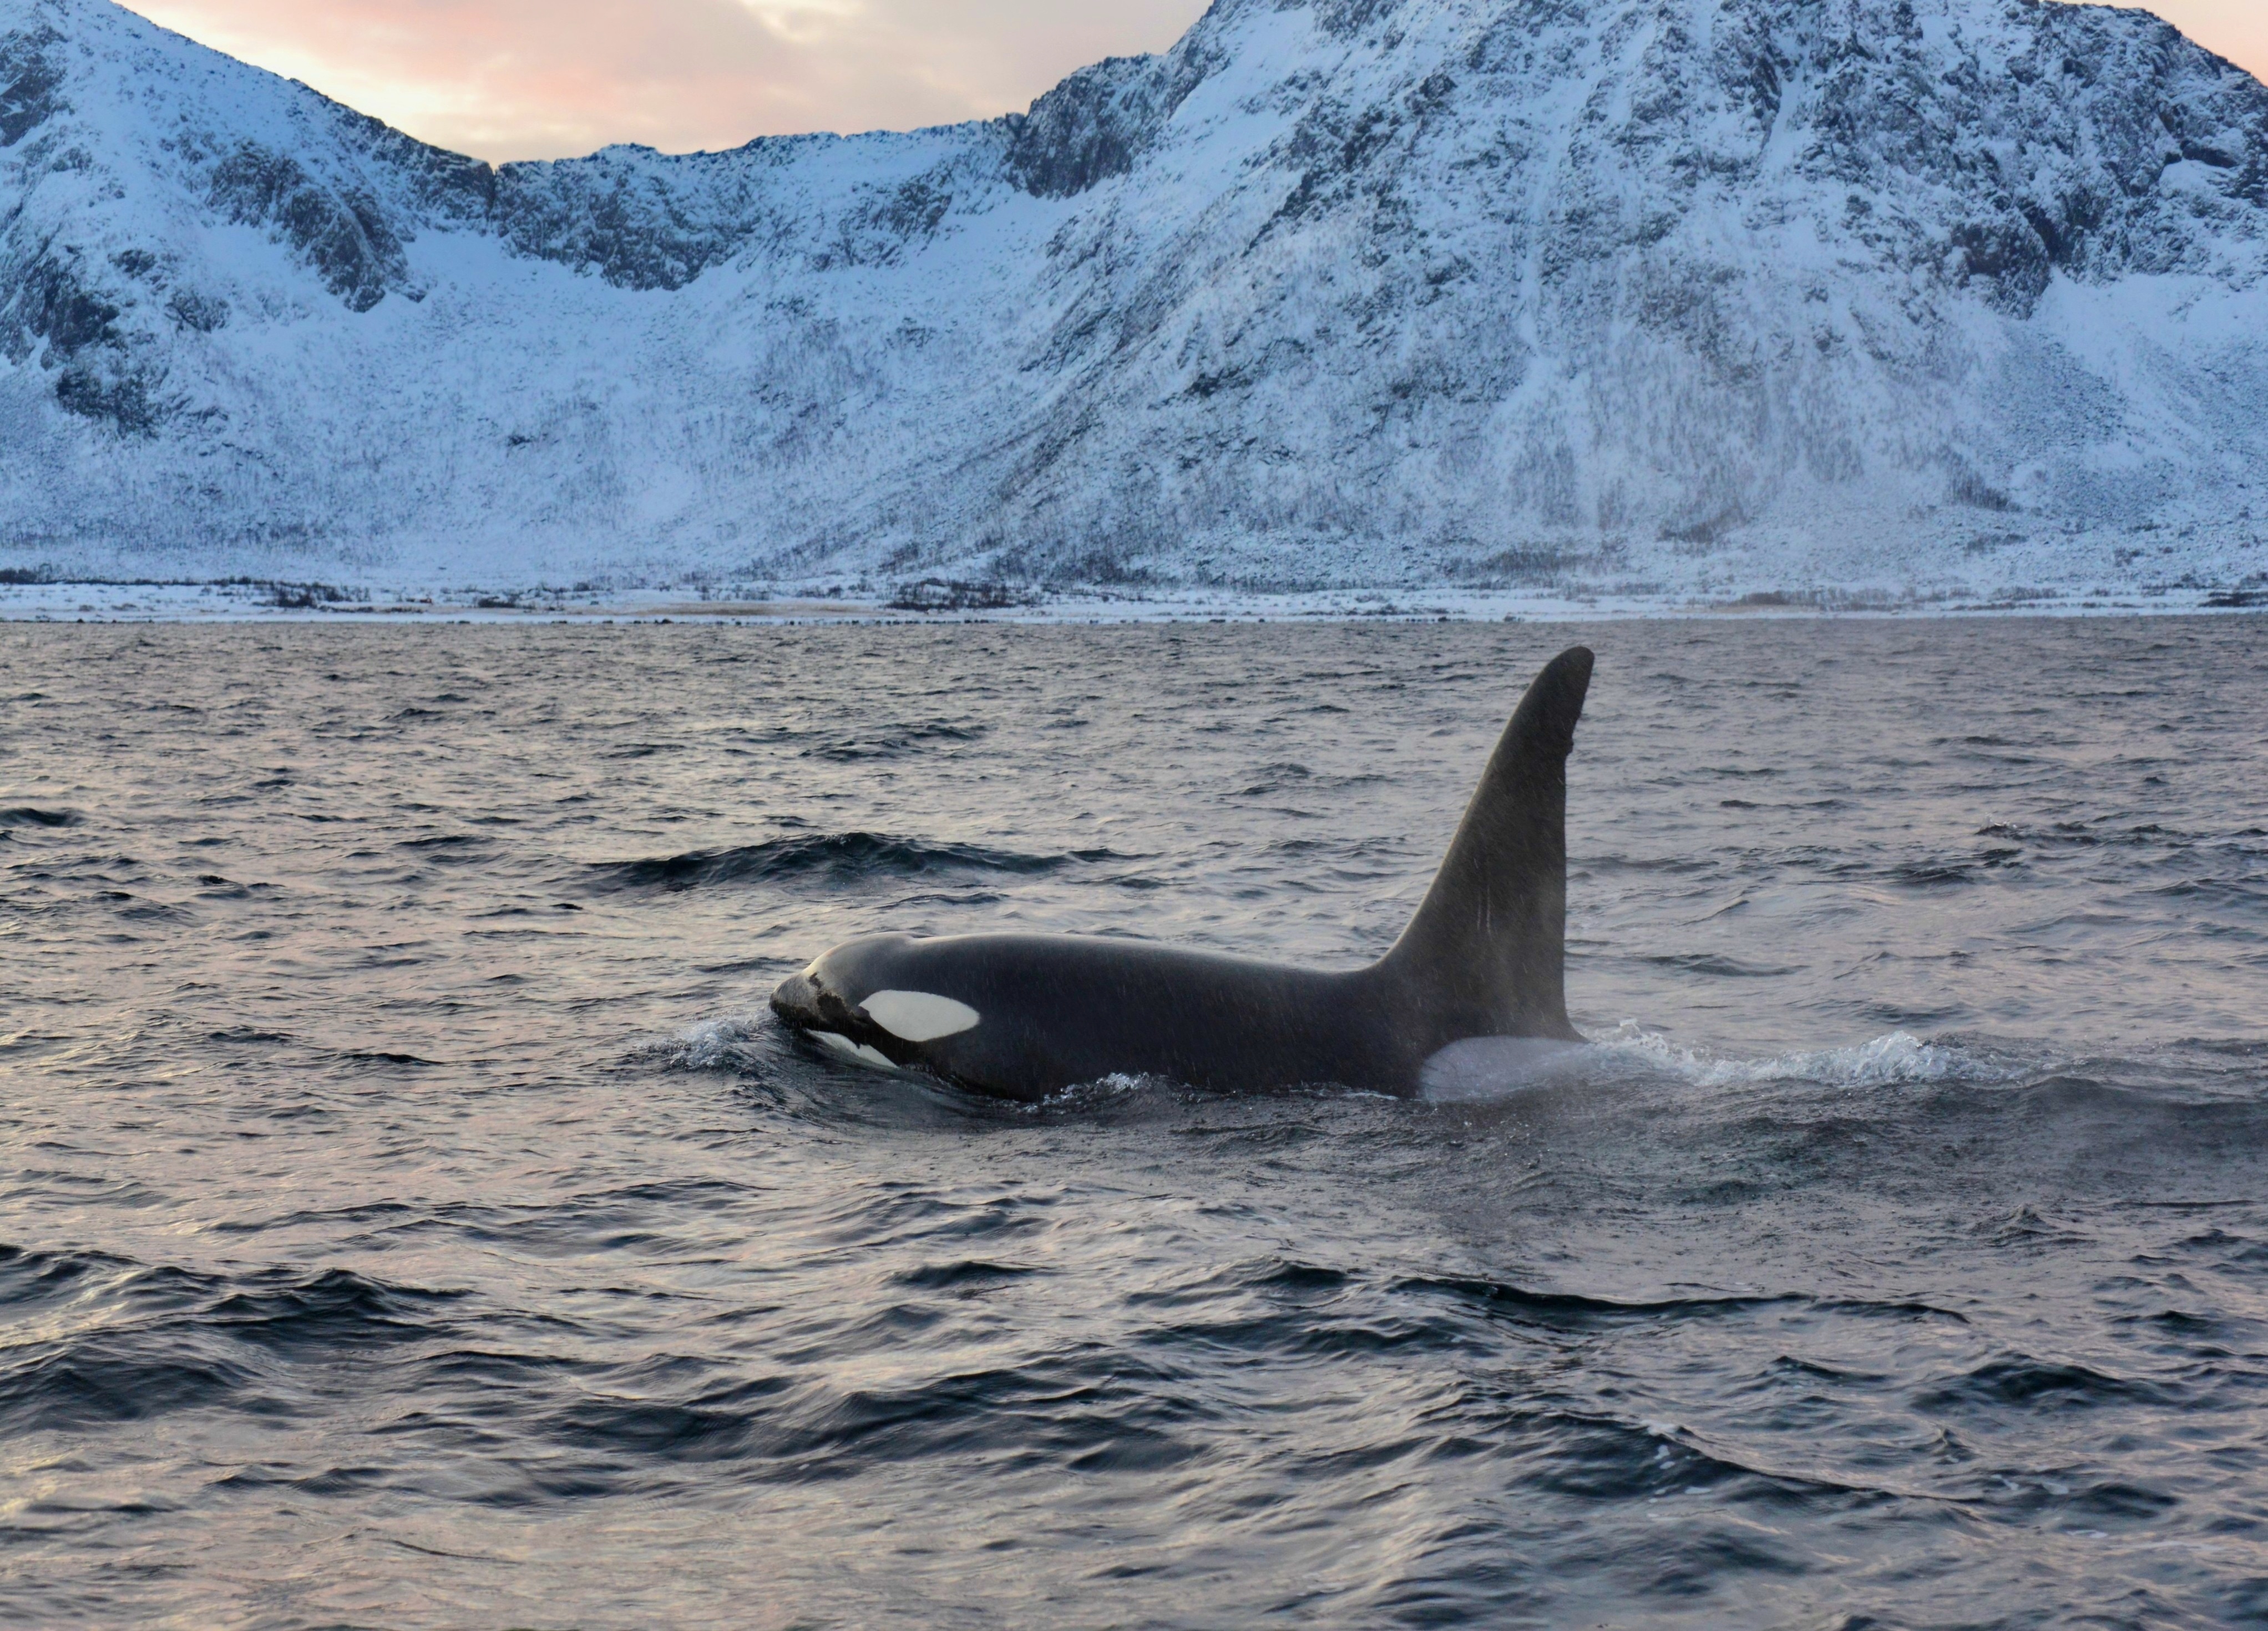  Researchers can now accurately predict the diets of remote killer whale populations using their blubber fatty acids.